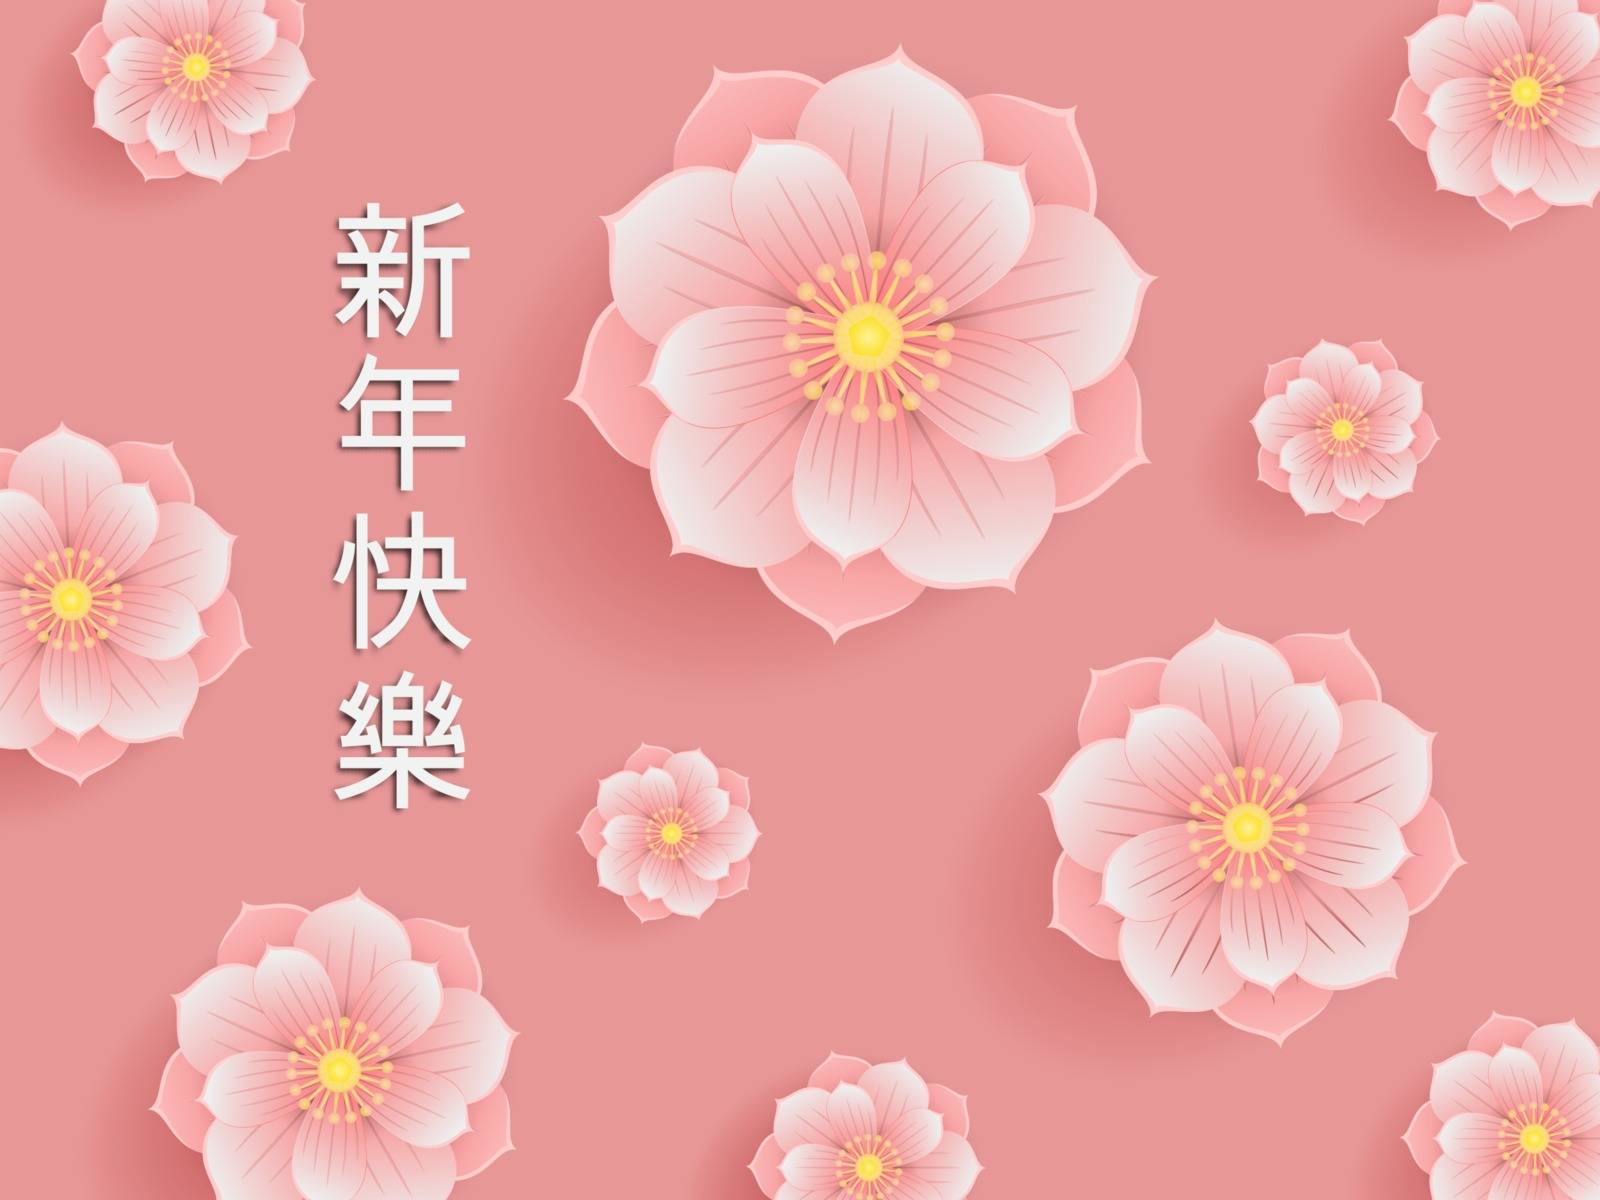 Pink flowers illustration with Chinese calligraphy in pink backg by Pimoboyd